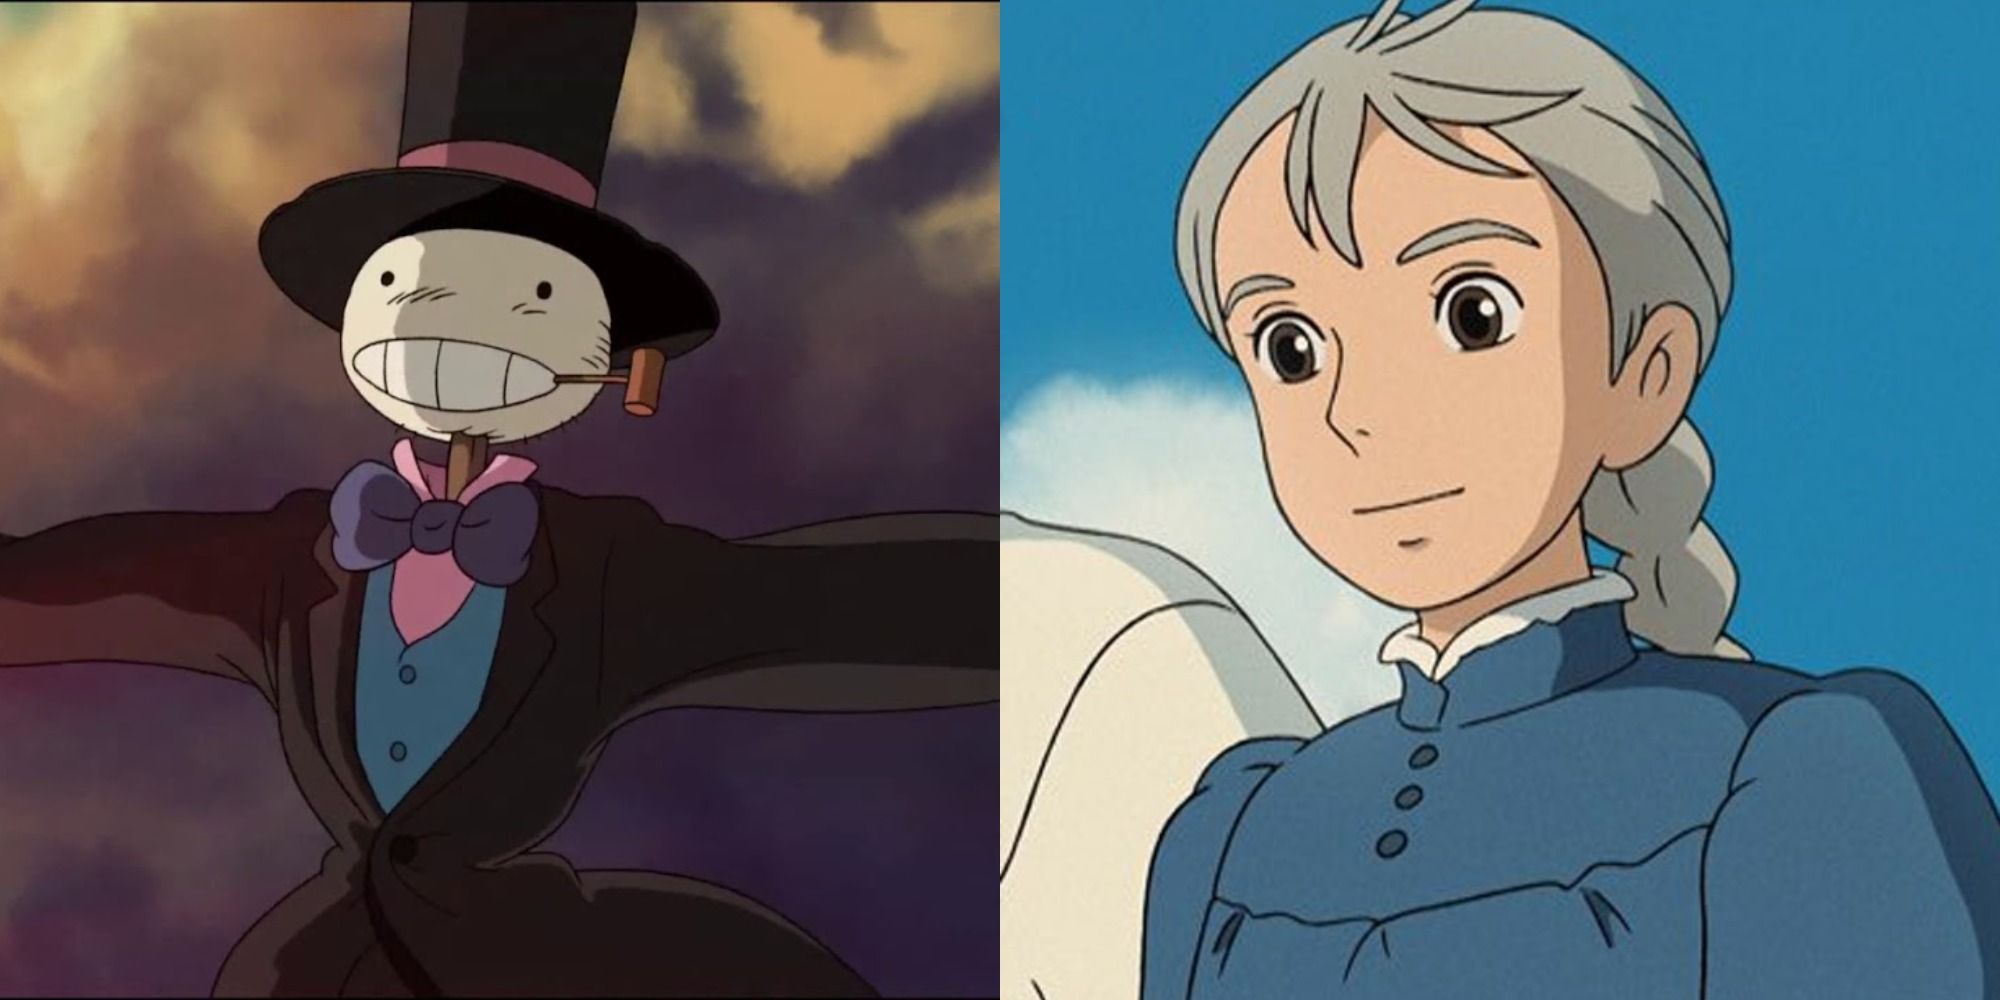 Split image showing Turnip Head and Sophie in Howl's Moving Castle